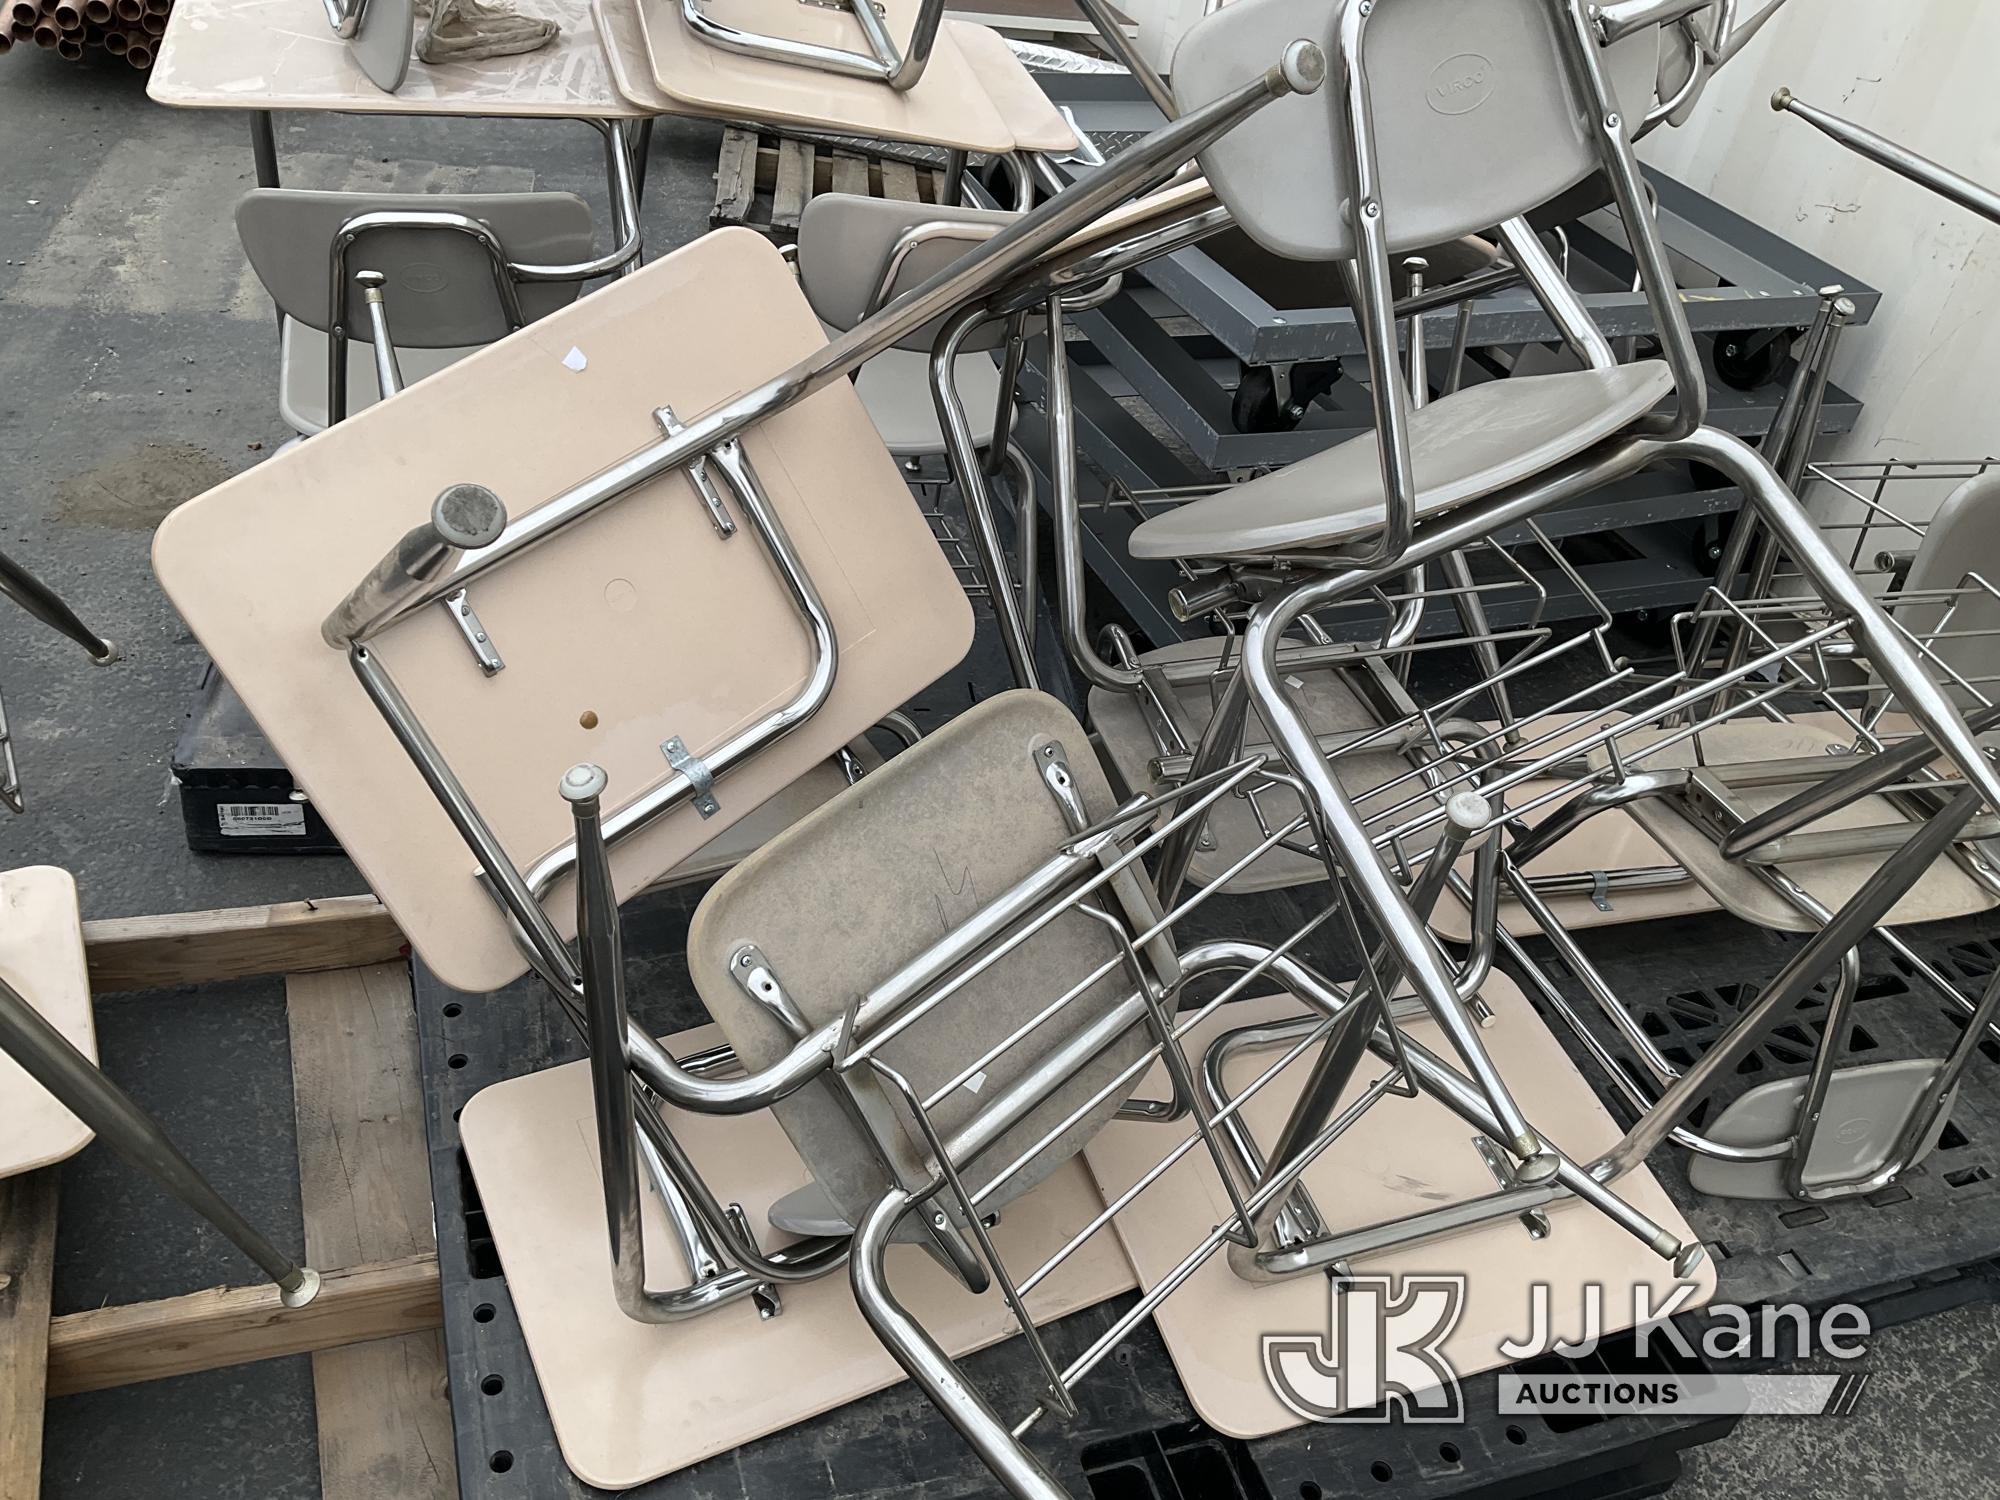 (Jurupa Valley, CA) 4 Pallets Of School Desks & Metal Carts (Used) NOTE: This unit is being sold AS